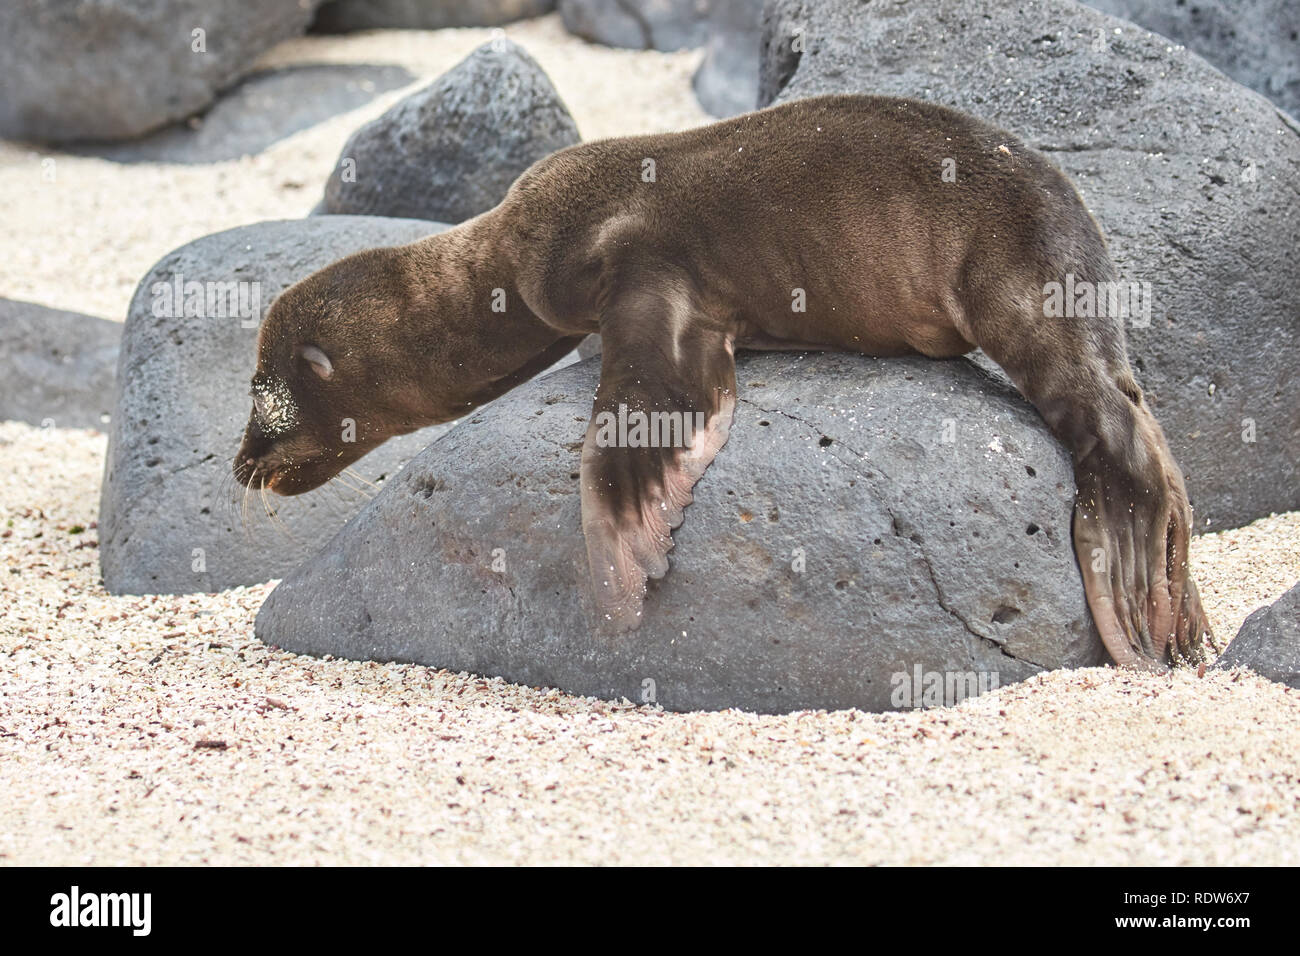 Baby Sea Lion on Beach with Rock Stock Photo